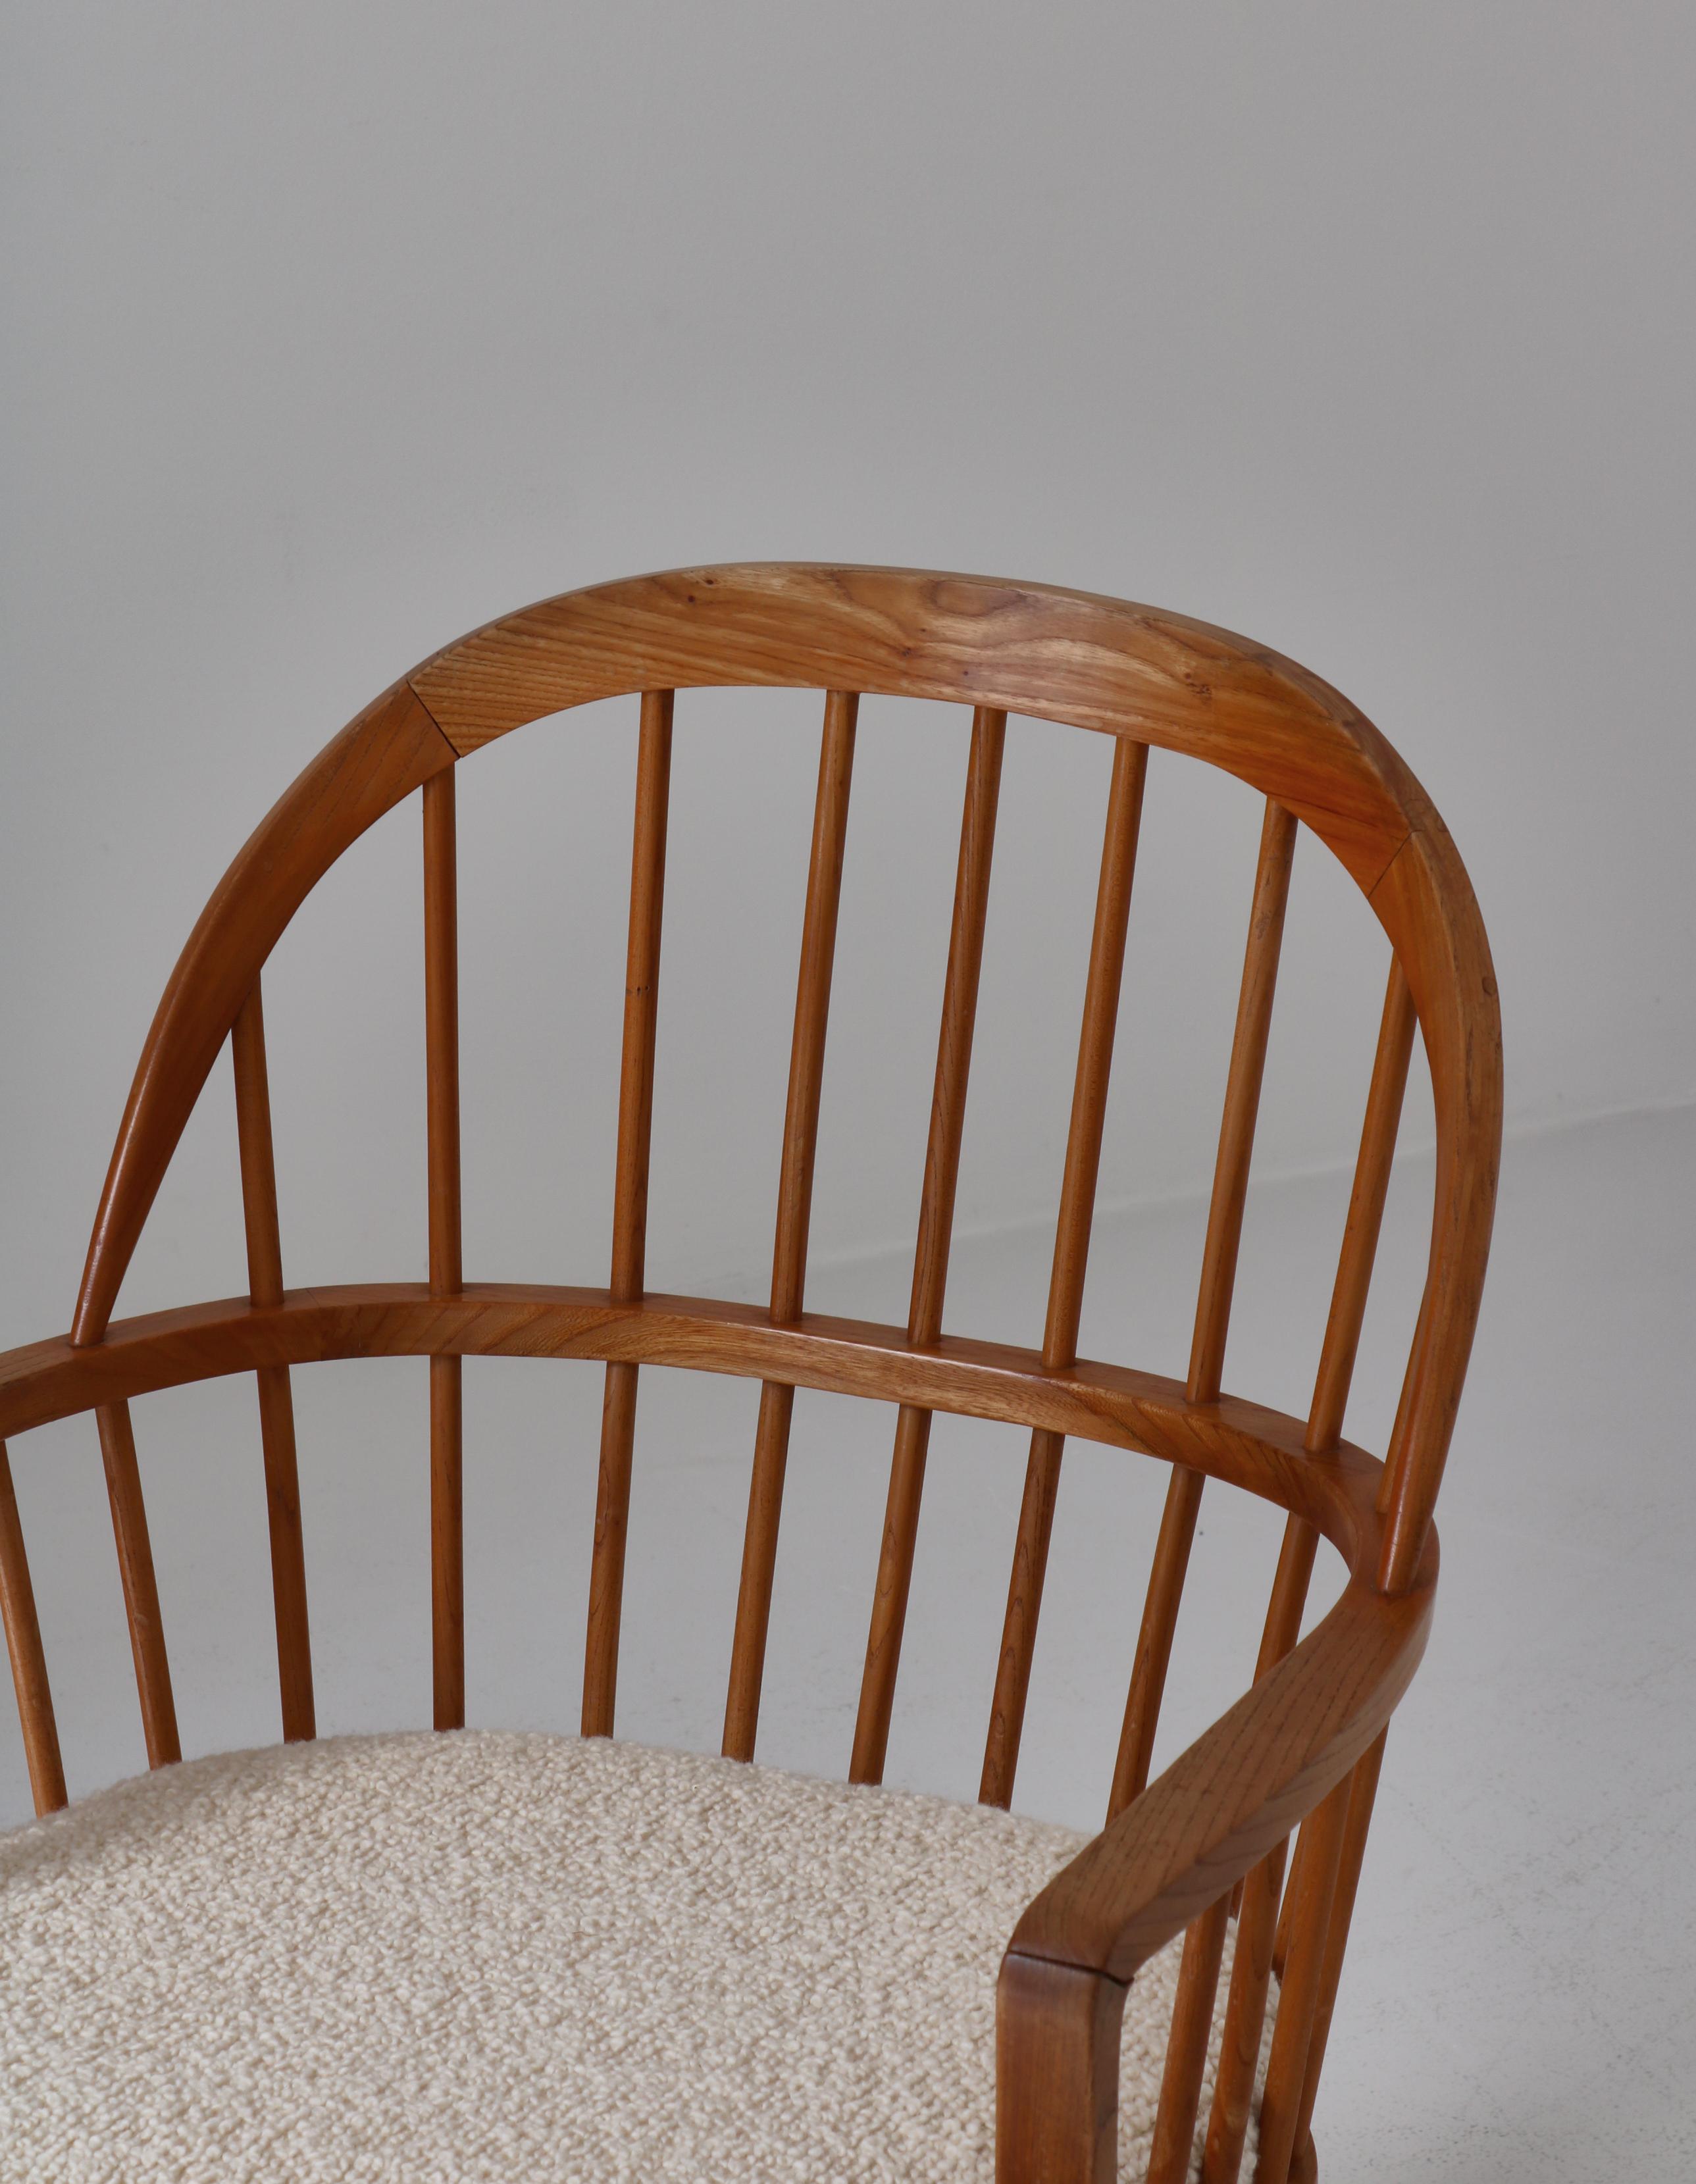 Scandinavian Modern Windsor Chair in Patinated Ash and White Bouclé, 1940s For Sale 6